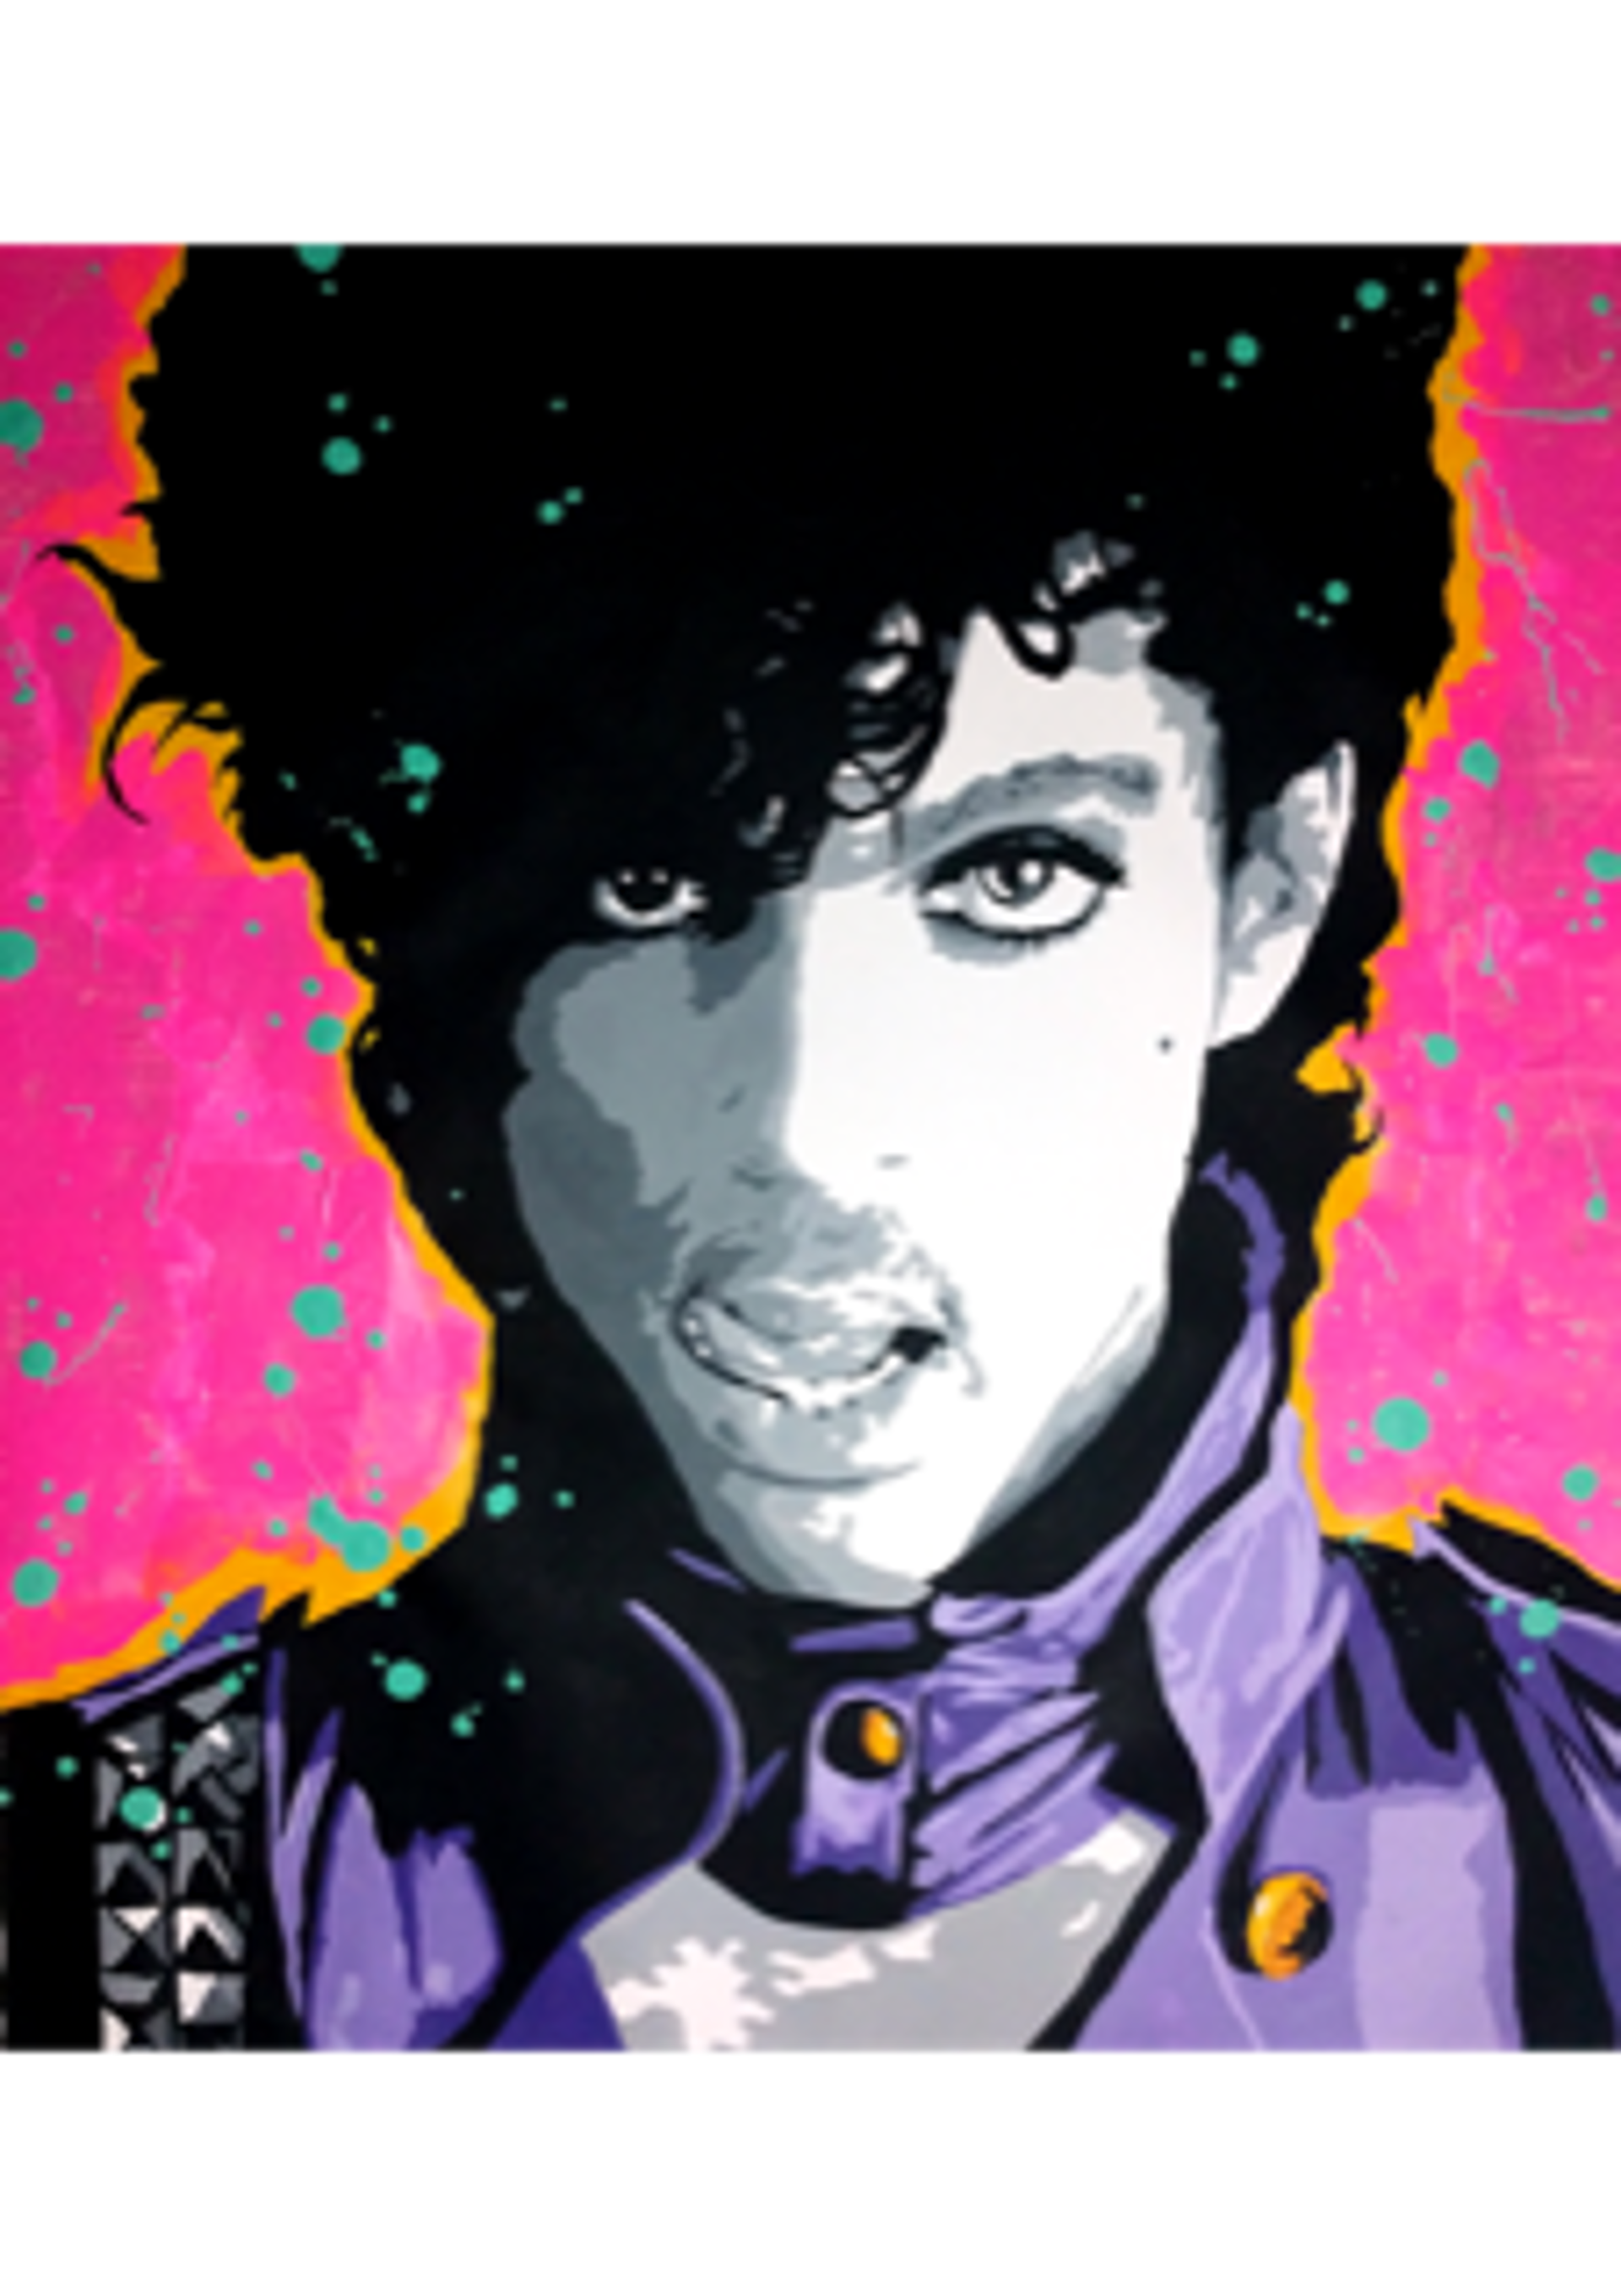 Prince by Jack Andriano